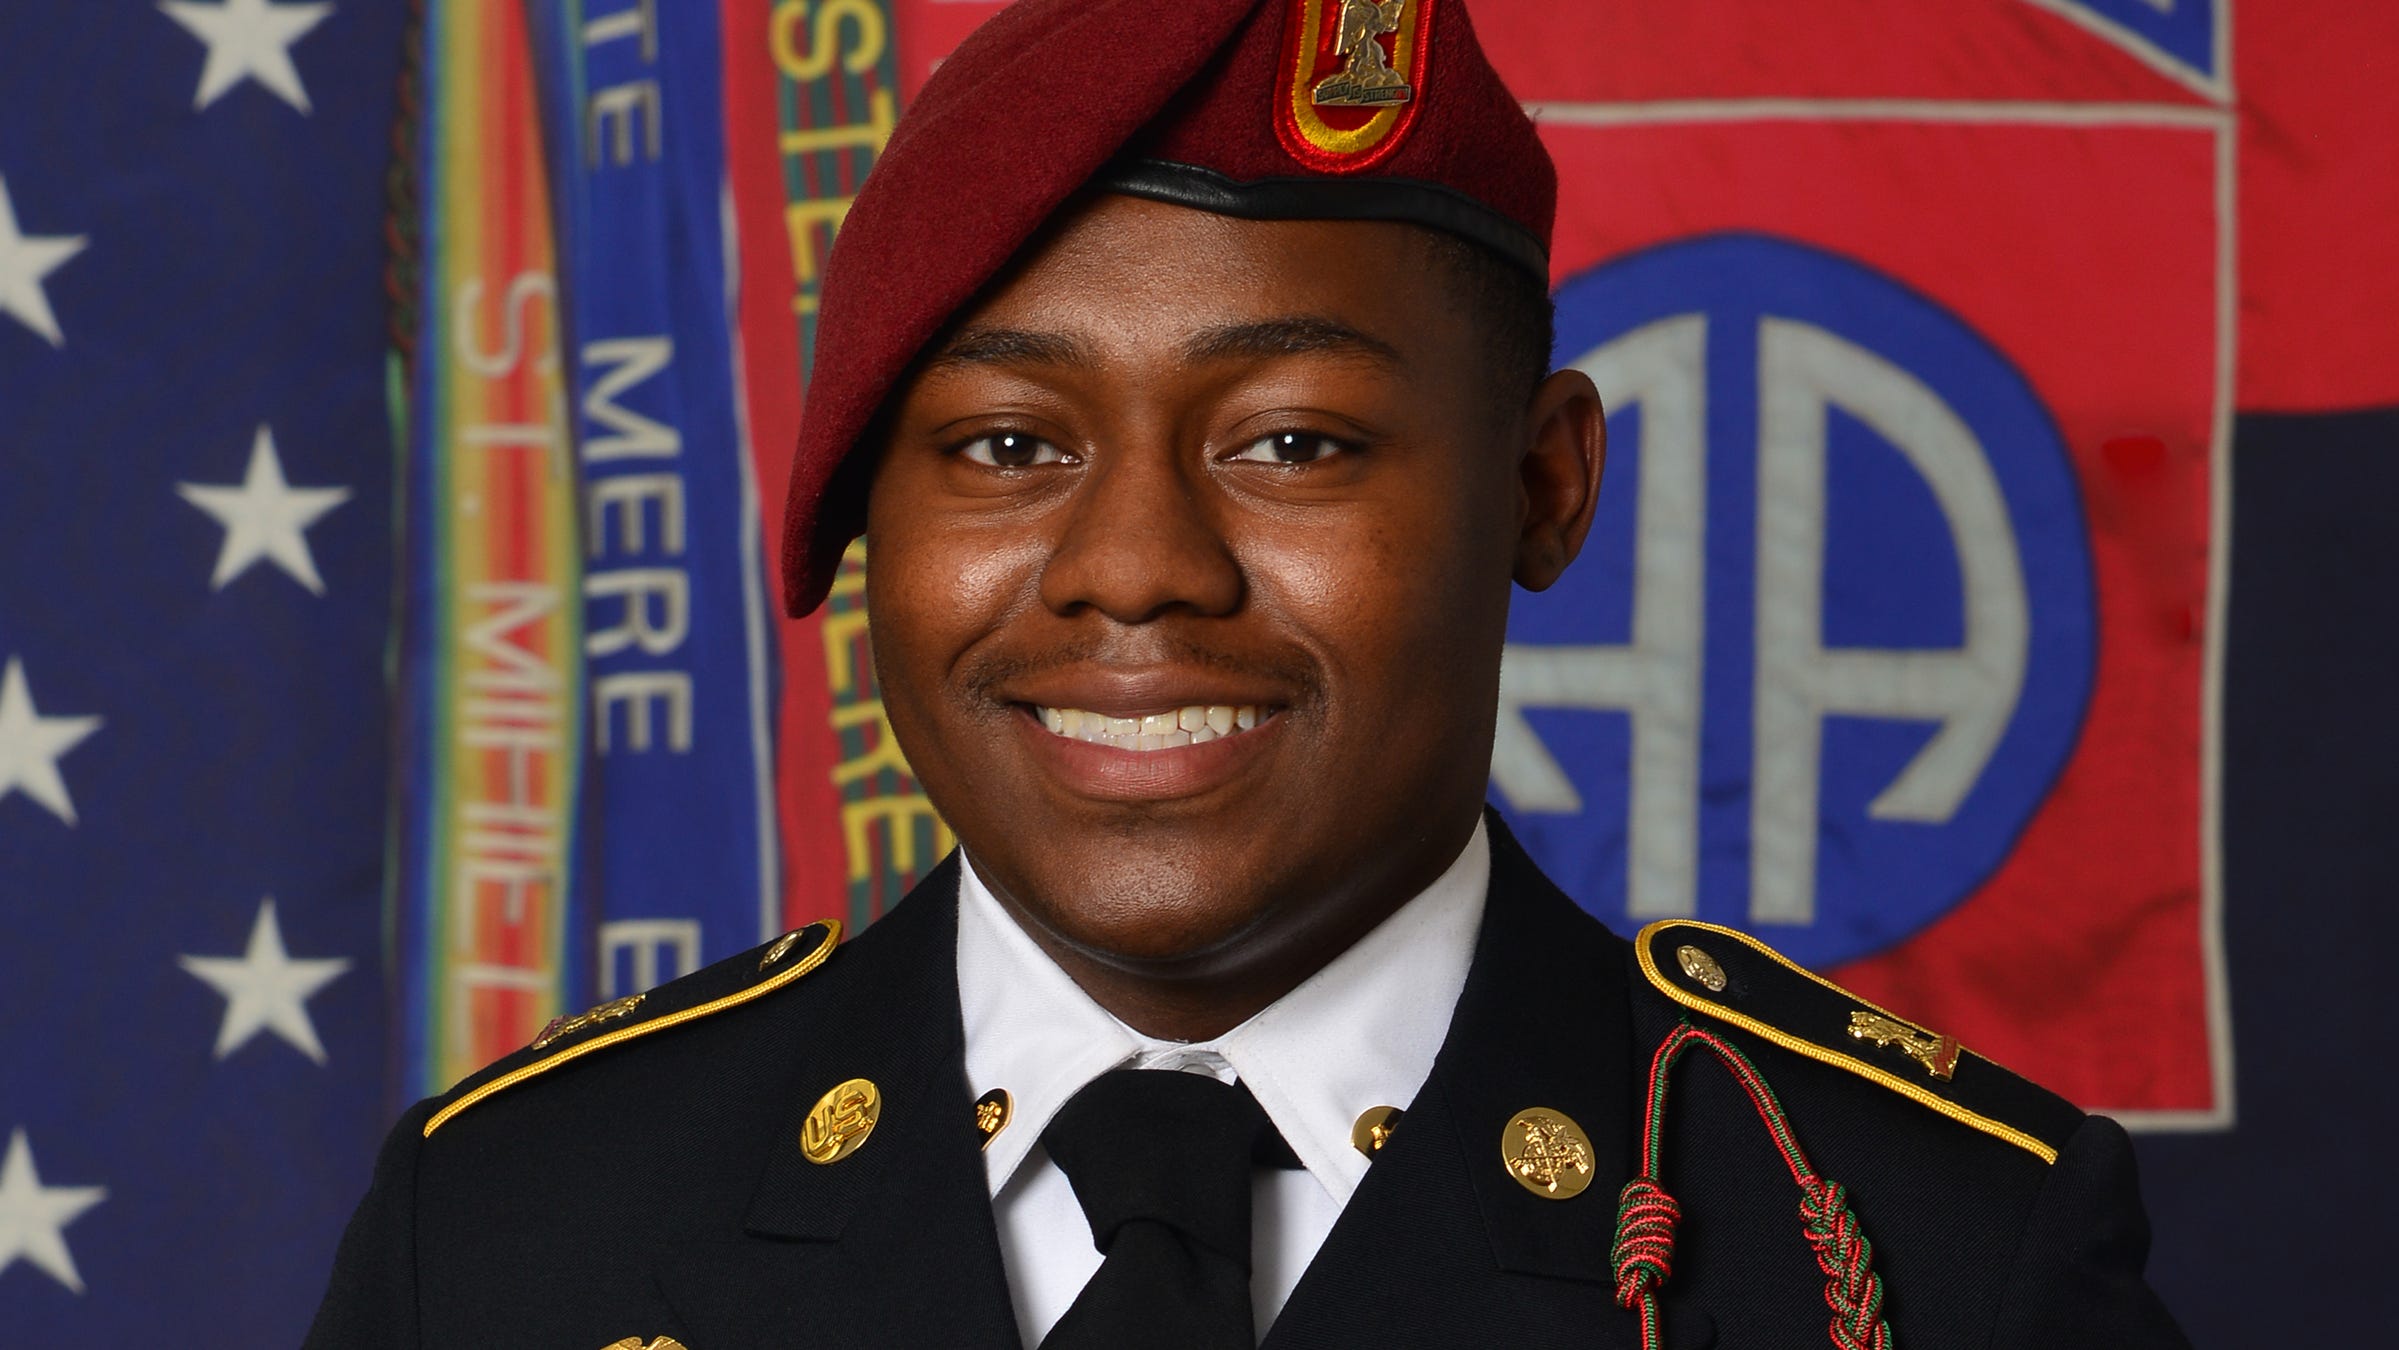 U.S. Army Paratrooper Found Dead with Multiple Gunshot Wounds Outside His North Carolina Apartment Near Fort Bragg